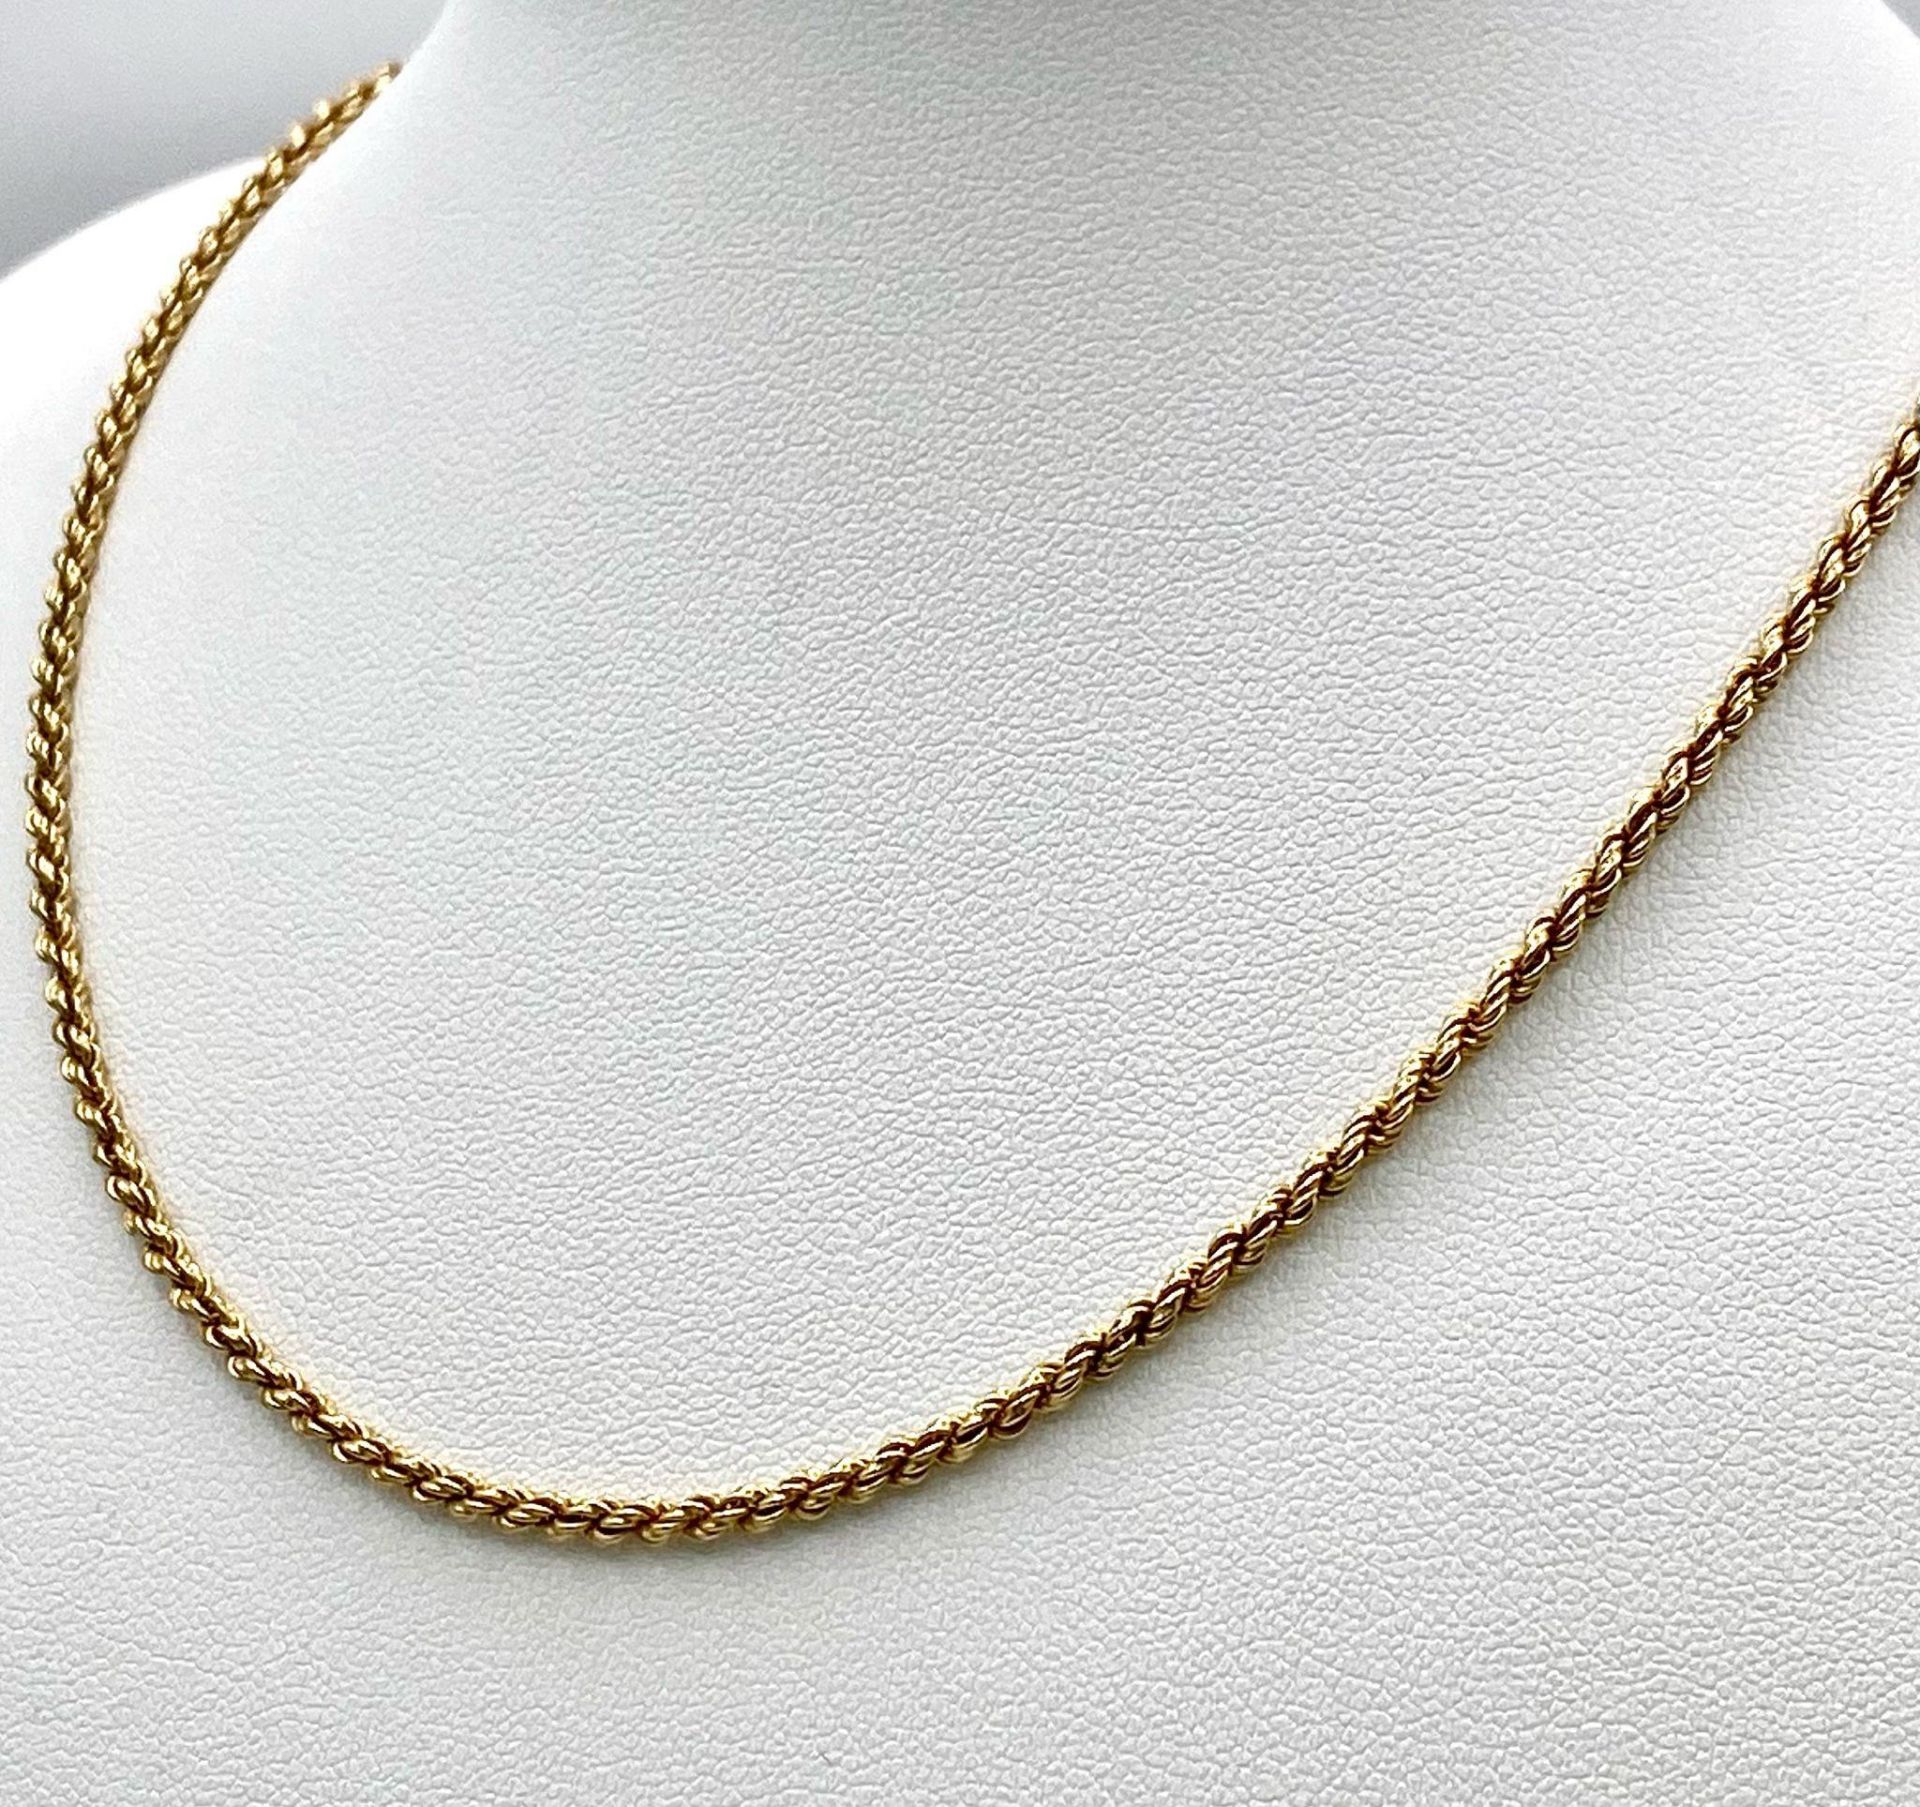 A Vintage 9K Yellow Gold Rope Necklace. 38cm. 7.36g weight. - Image 3 of 4